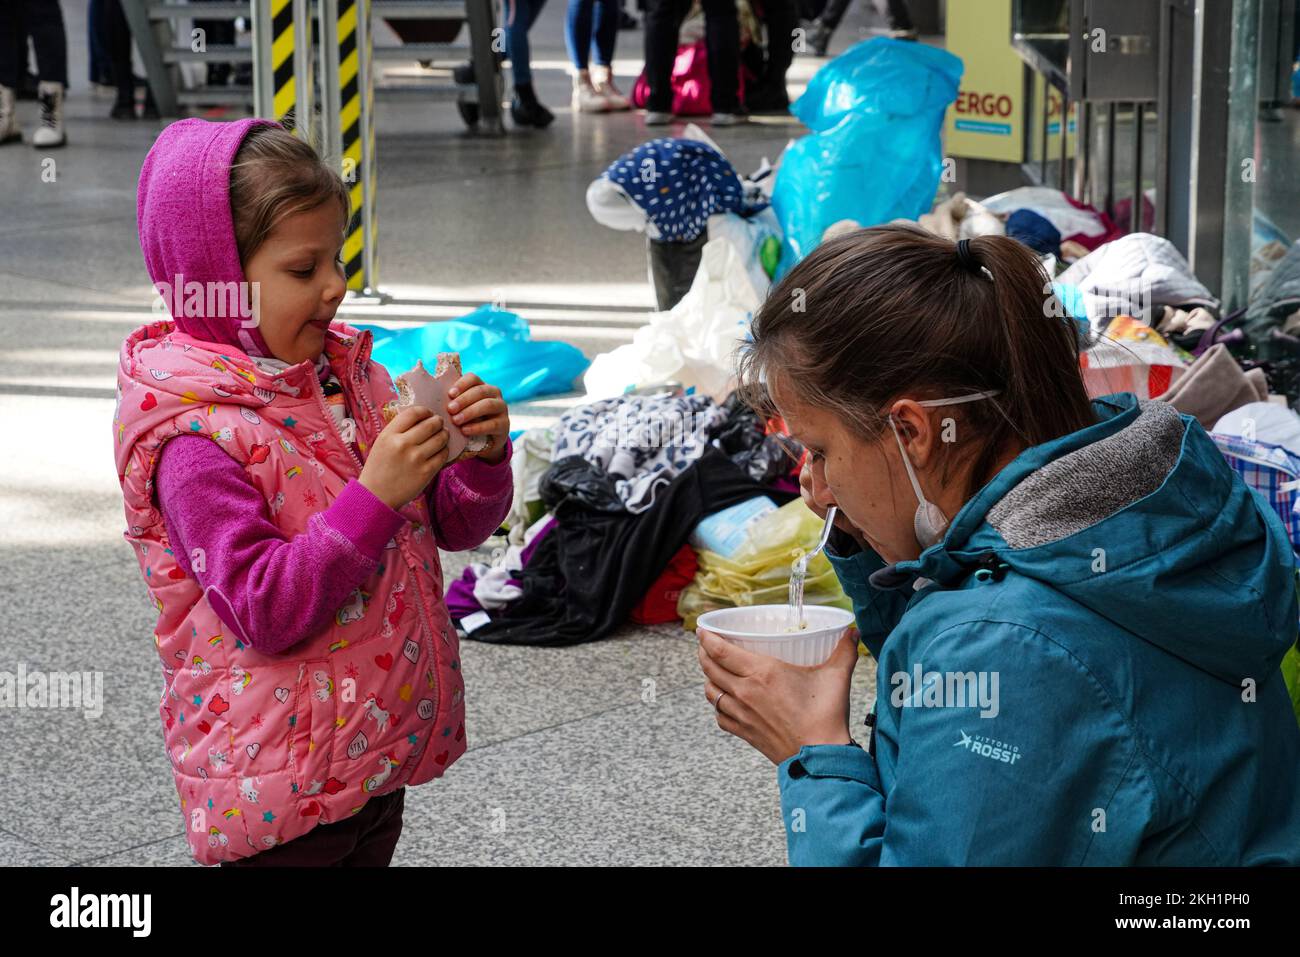 A woman sits squatting on the floor of a hall at Munich Central Station. She has a plastic cup in her hand containing soup. Her daughter is eating. Stock Photo